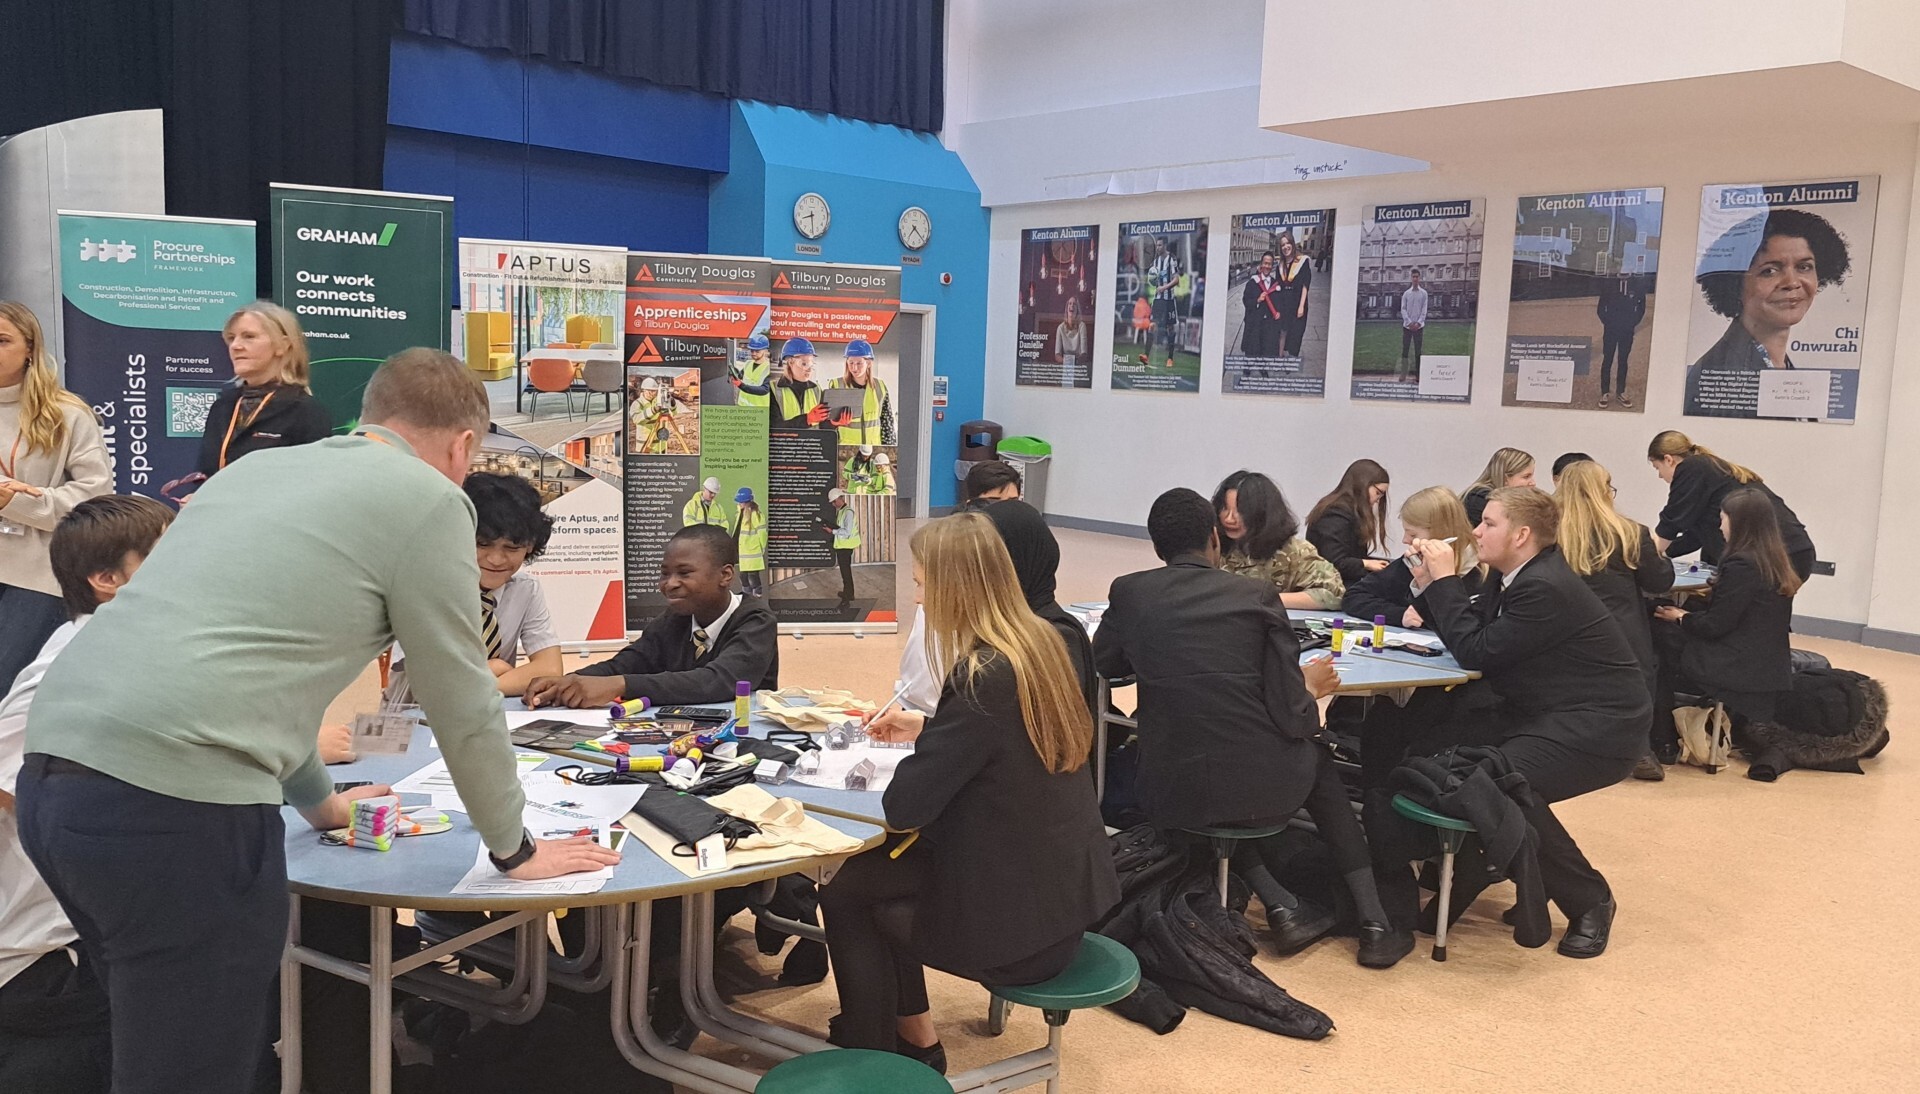 GAM attend a Youth Engagement Day at Kenton School, Newcastle image